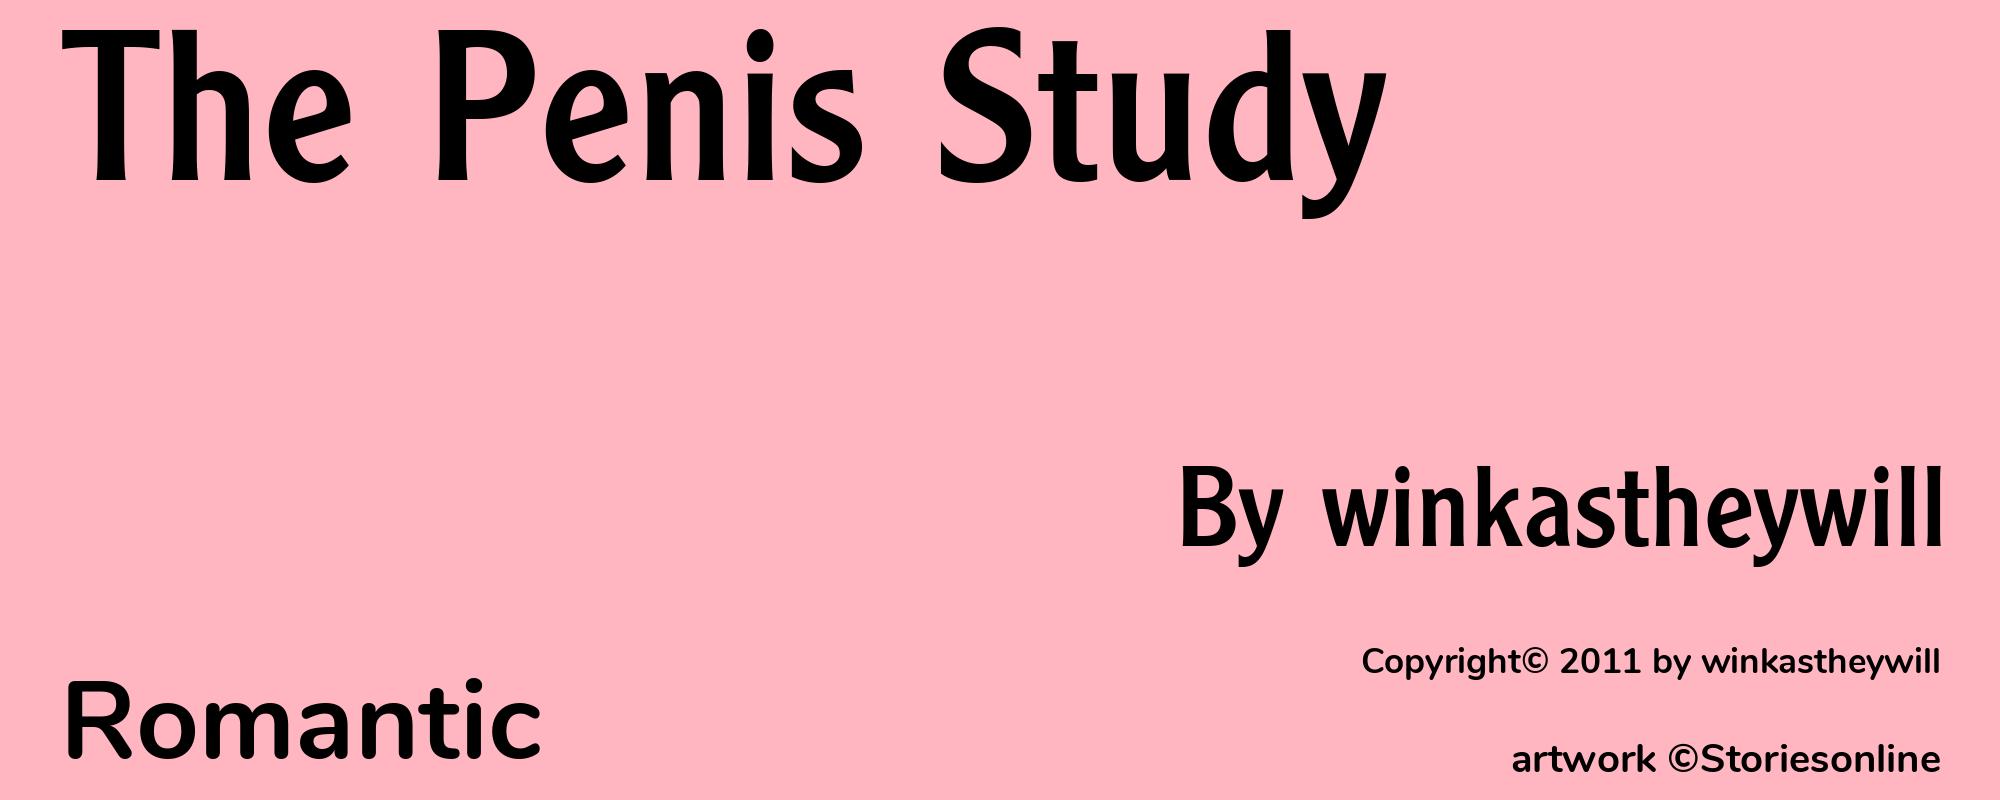 The Penis Study - Cover